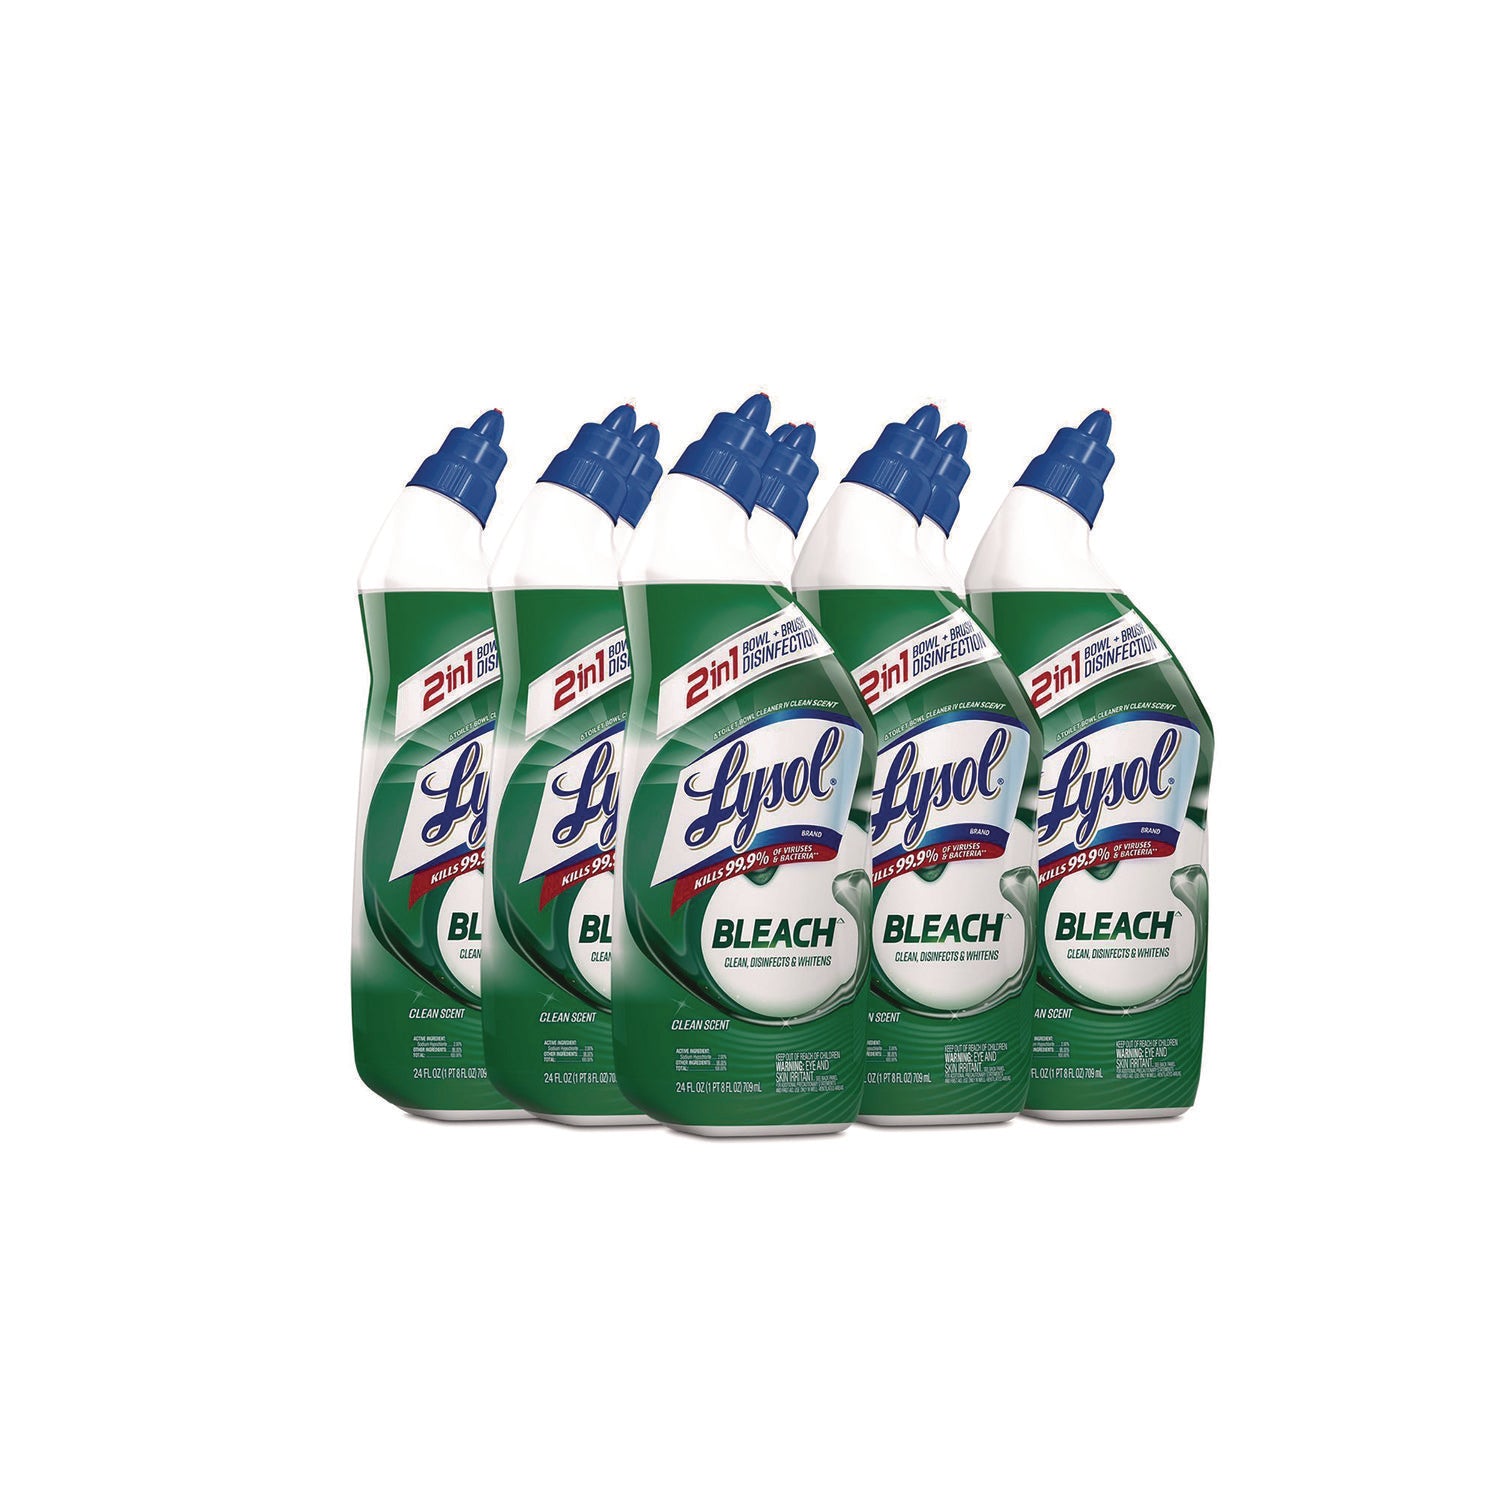 disinfectant-toilet-bowl-cleaner-with-bleach-24-oz-9-carton_rac98014 - 1